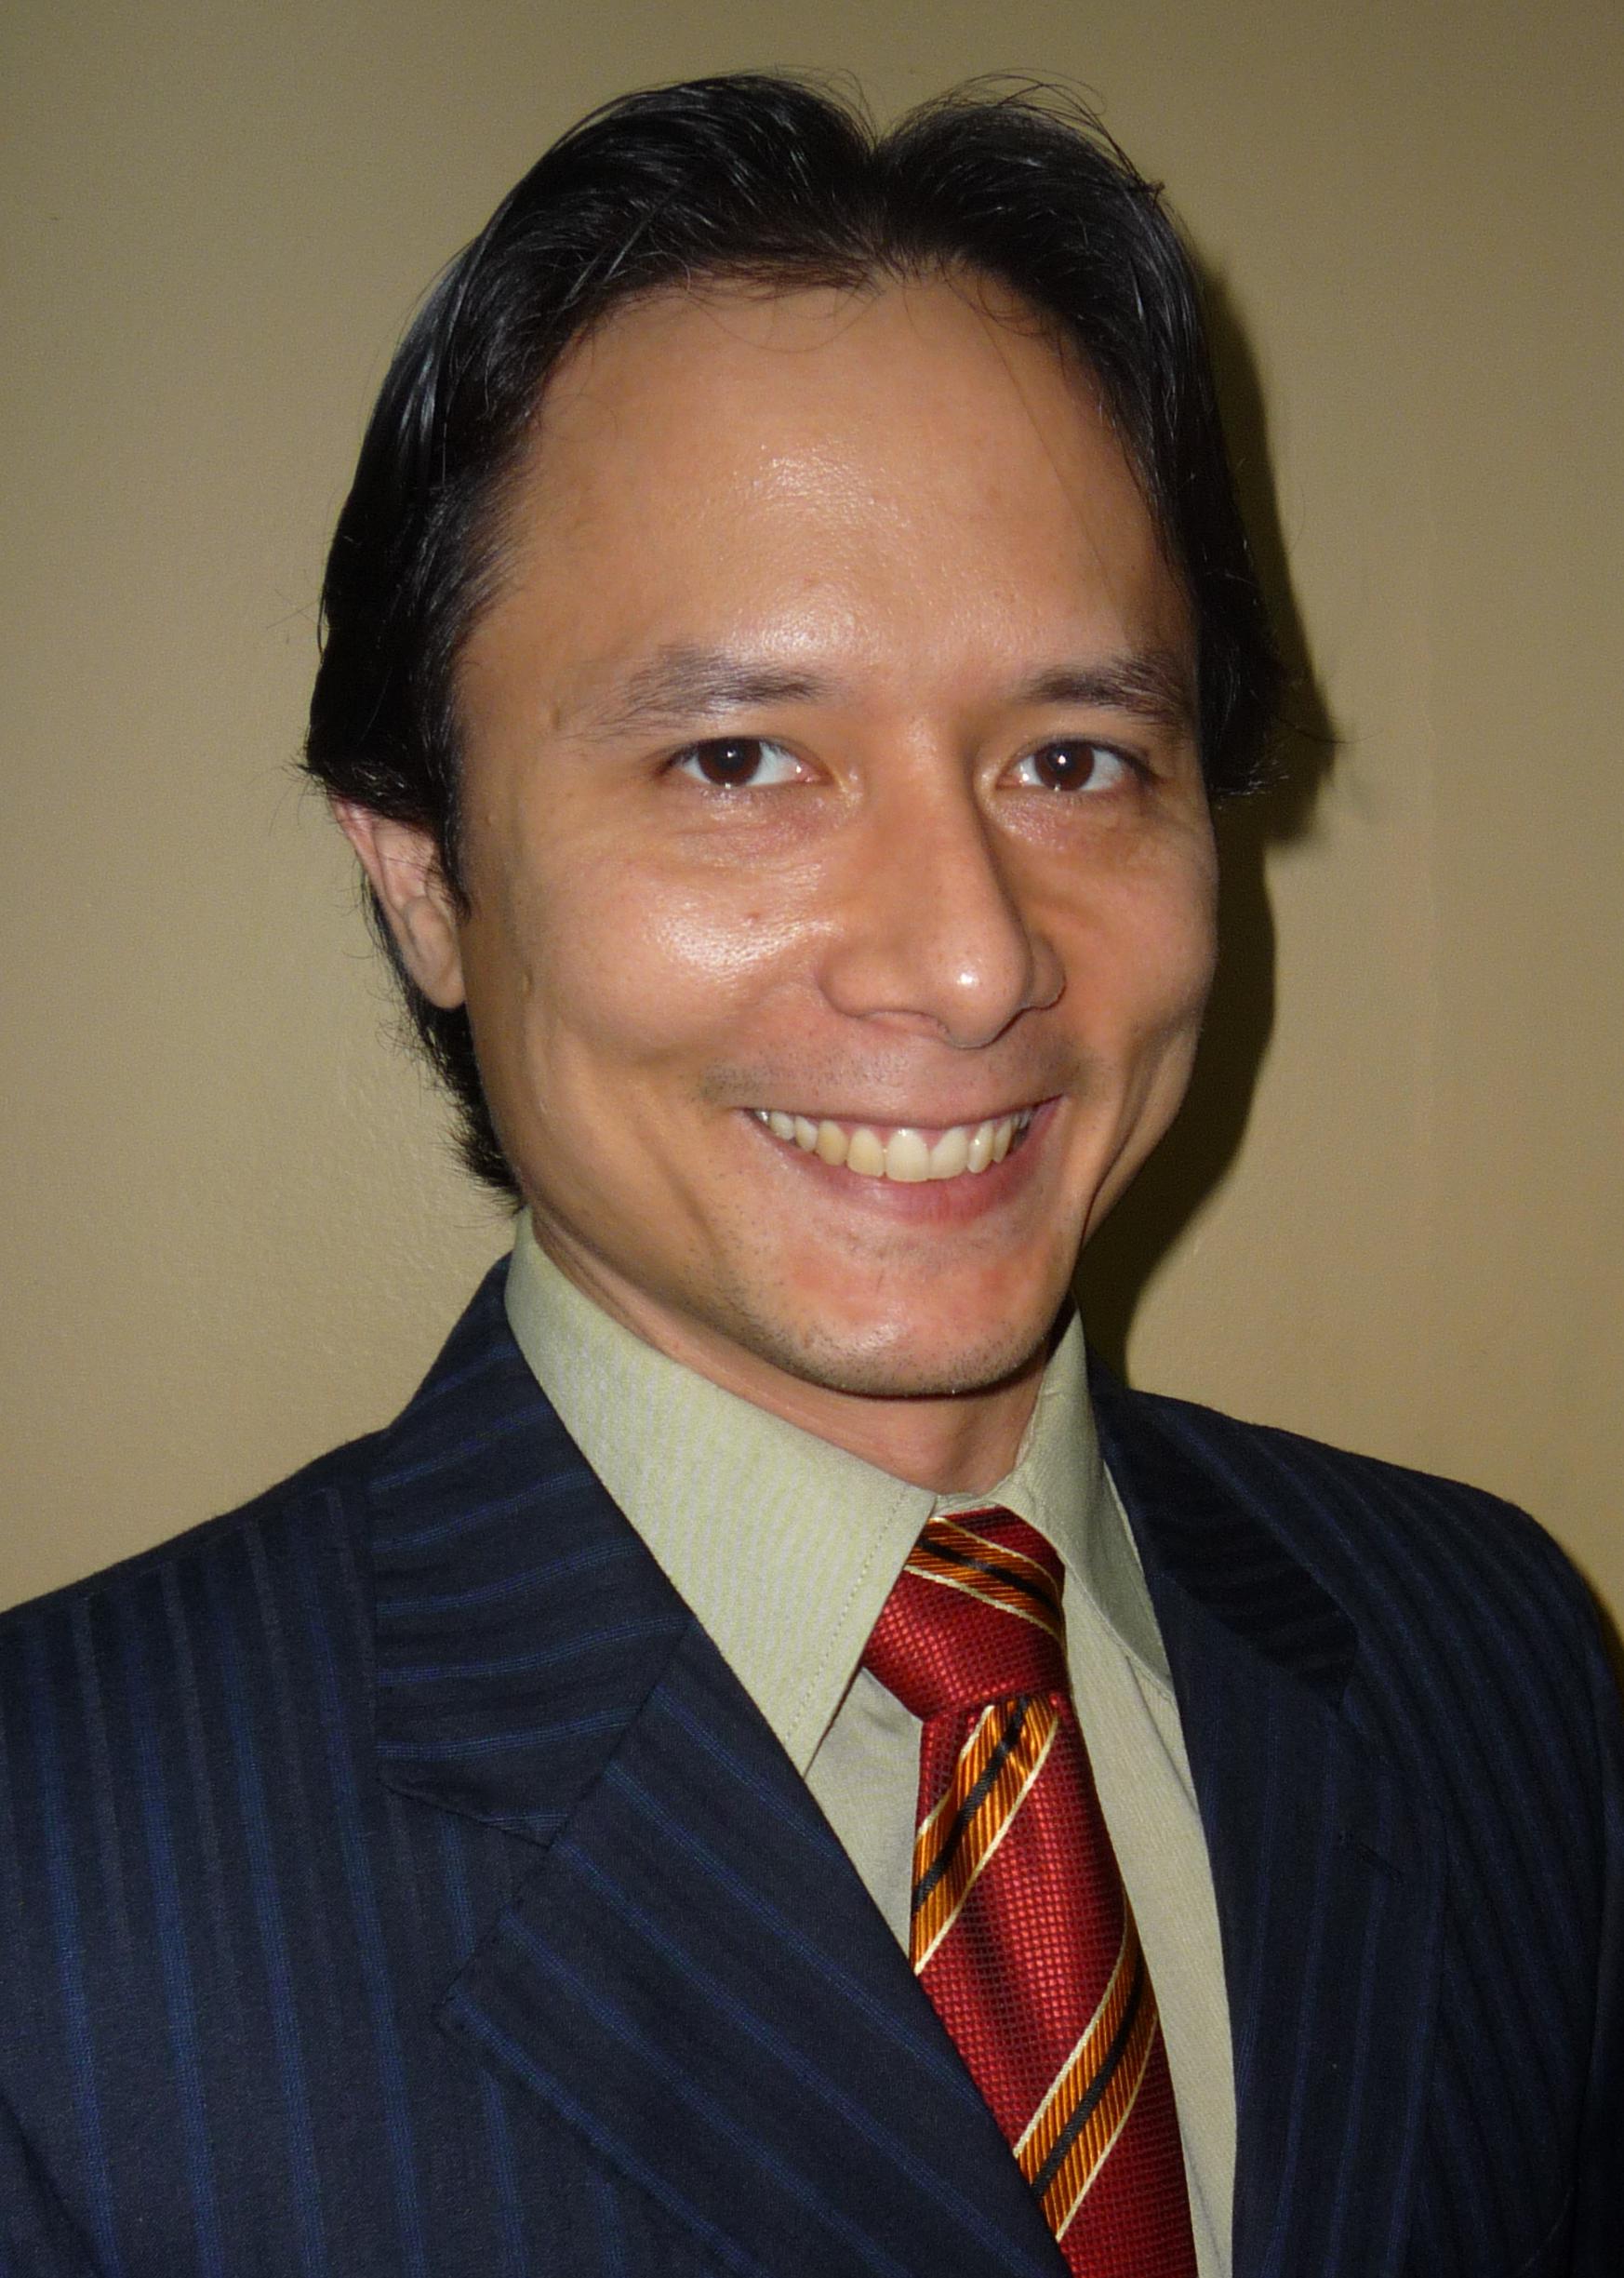 Eduardo F. Nakamura is an Assistant Professor of Computer Science at the Center of Research and Technological Innovation (FUCAPI), Brazil. - nakamura